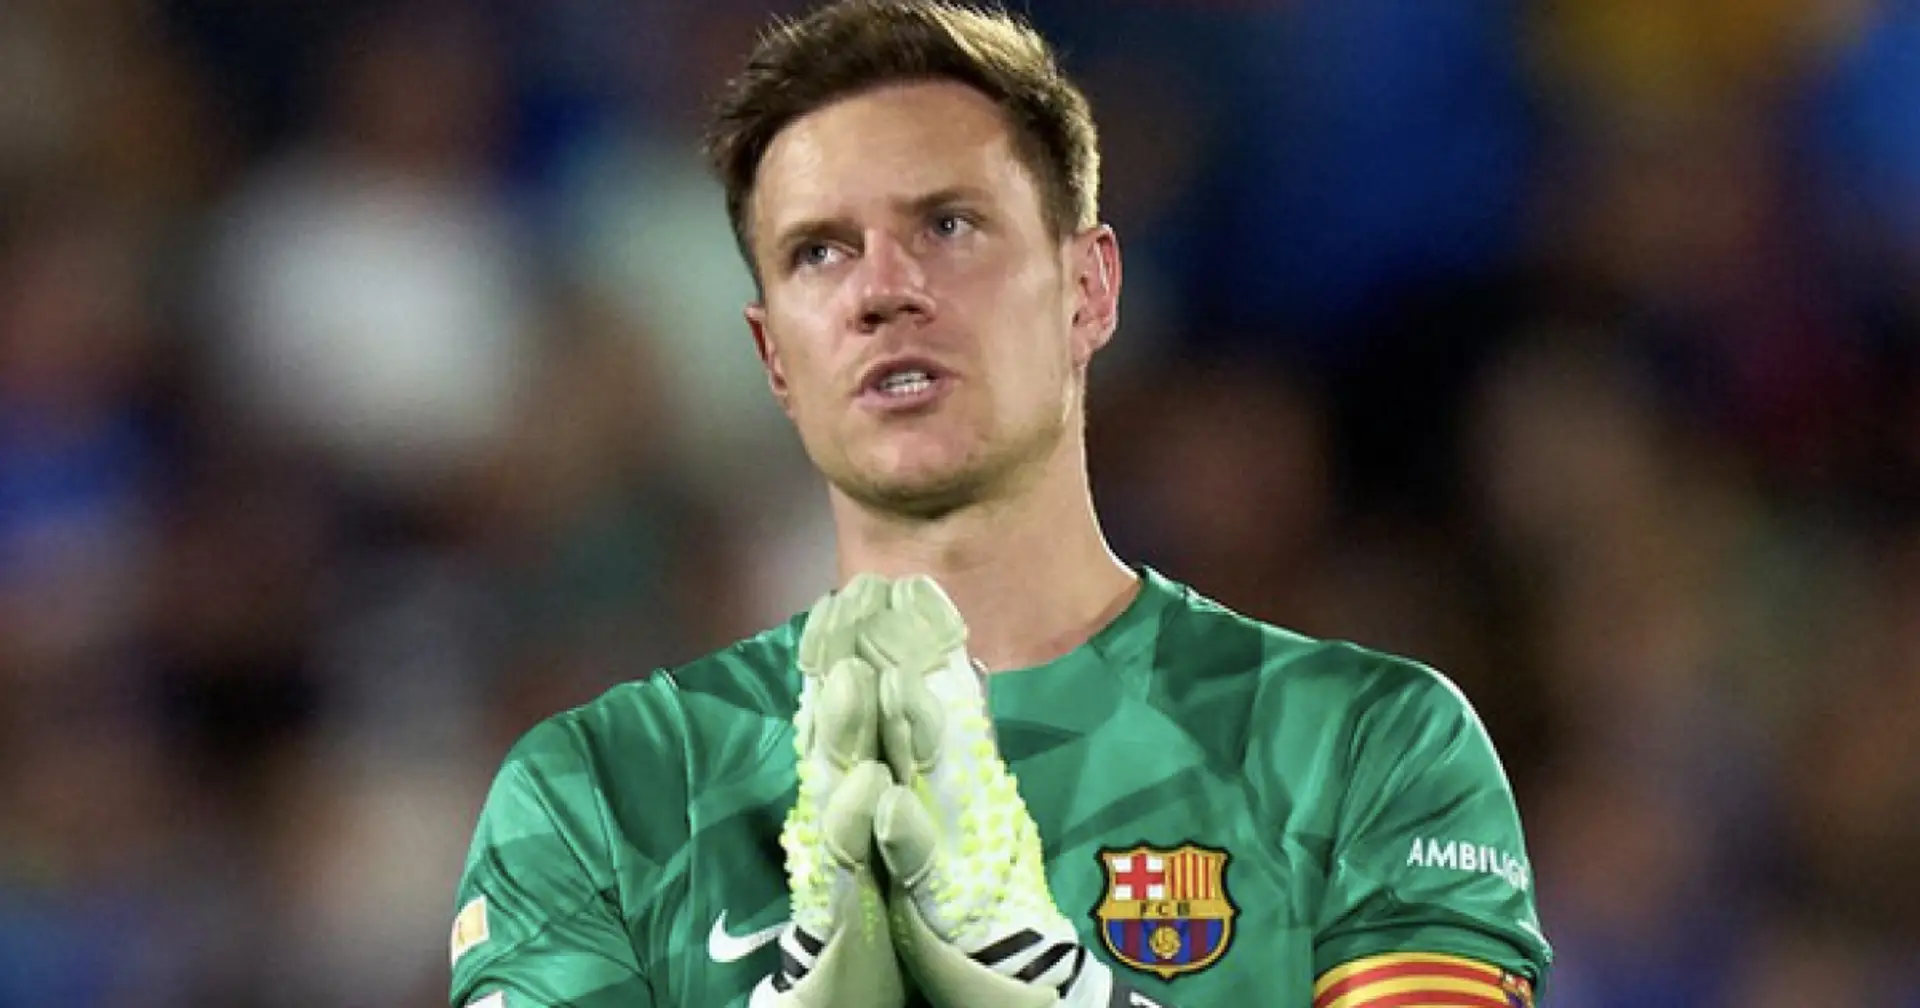 One Barca player back in team training ahead of Porto game — not Ter Stegen